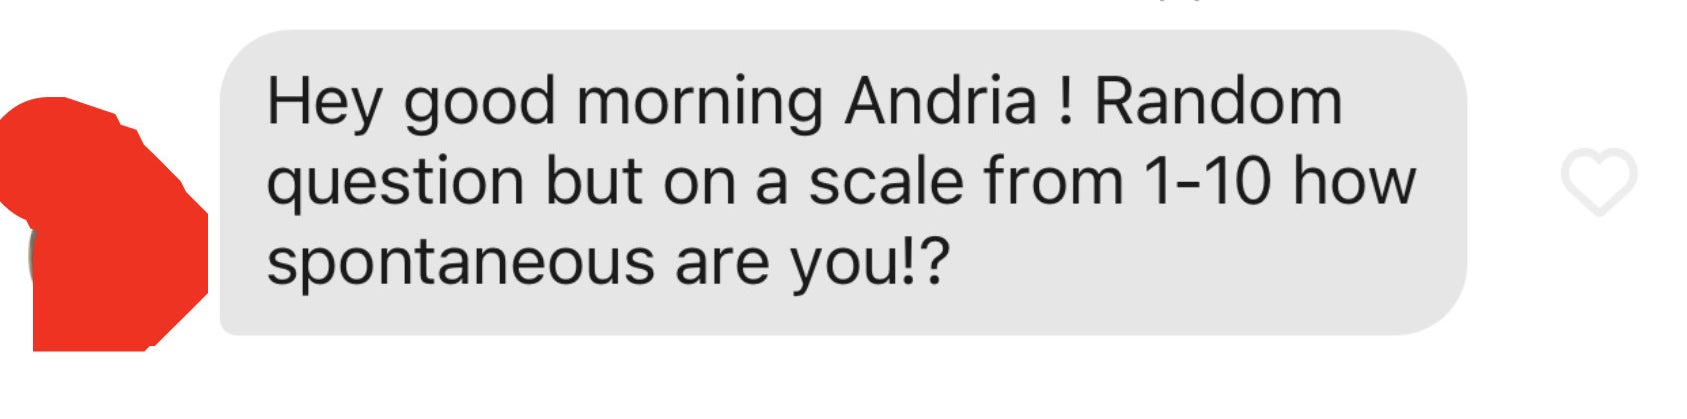 Hey good morning Andria! Random question but on a scale from 1-10 how spontaneous are you?!